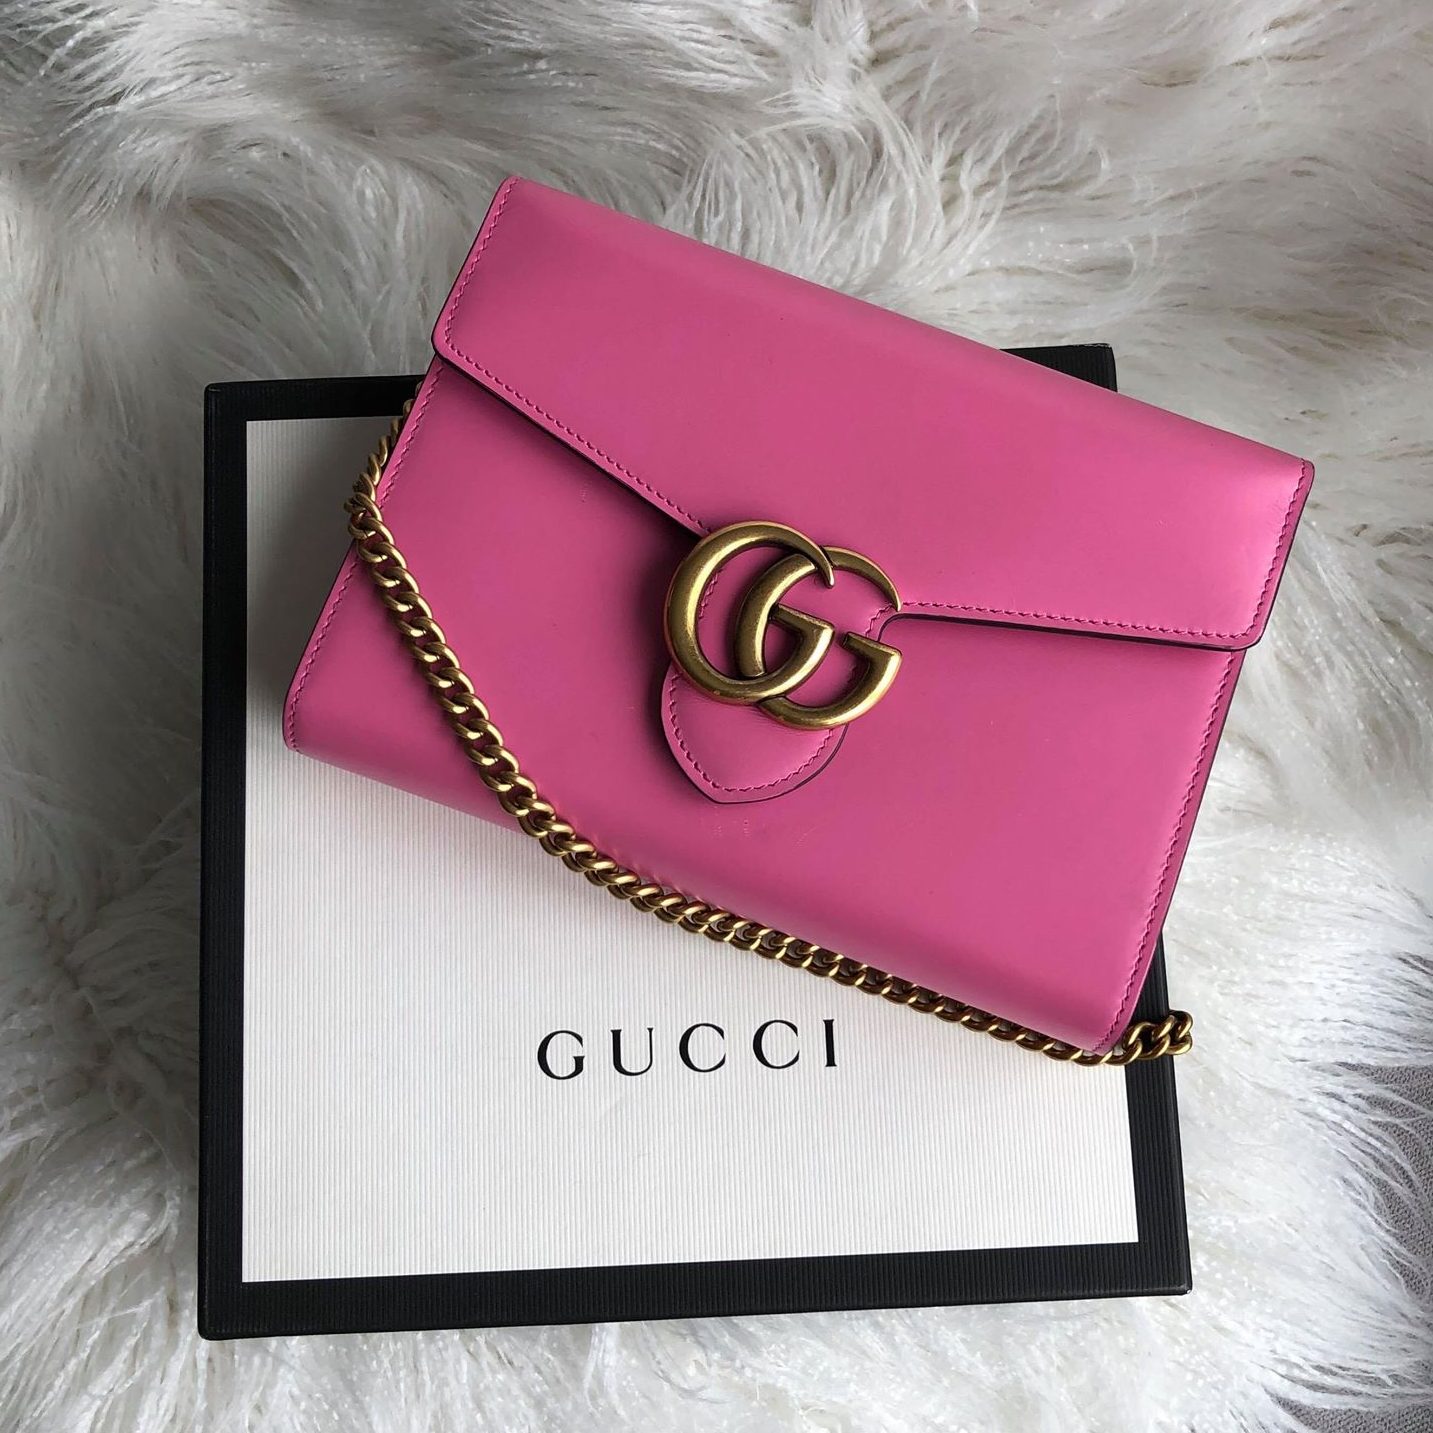 GUCCI Marmont Wallet Chain Bag - Pink - Adorn Collection